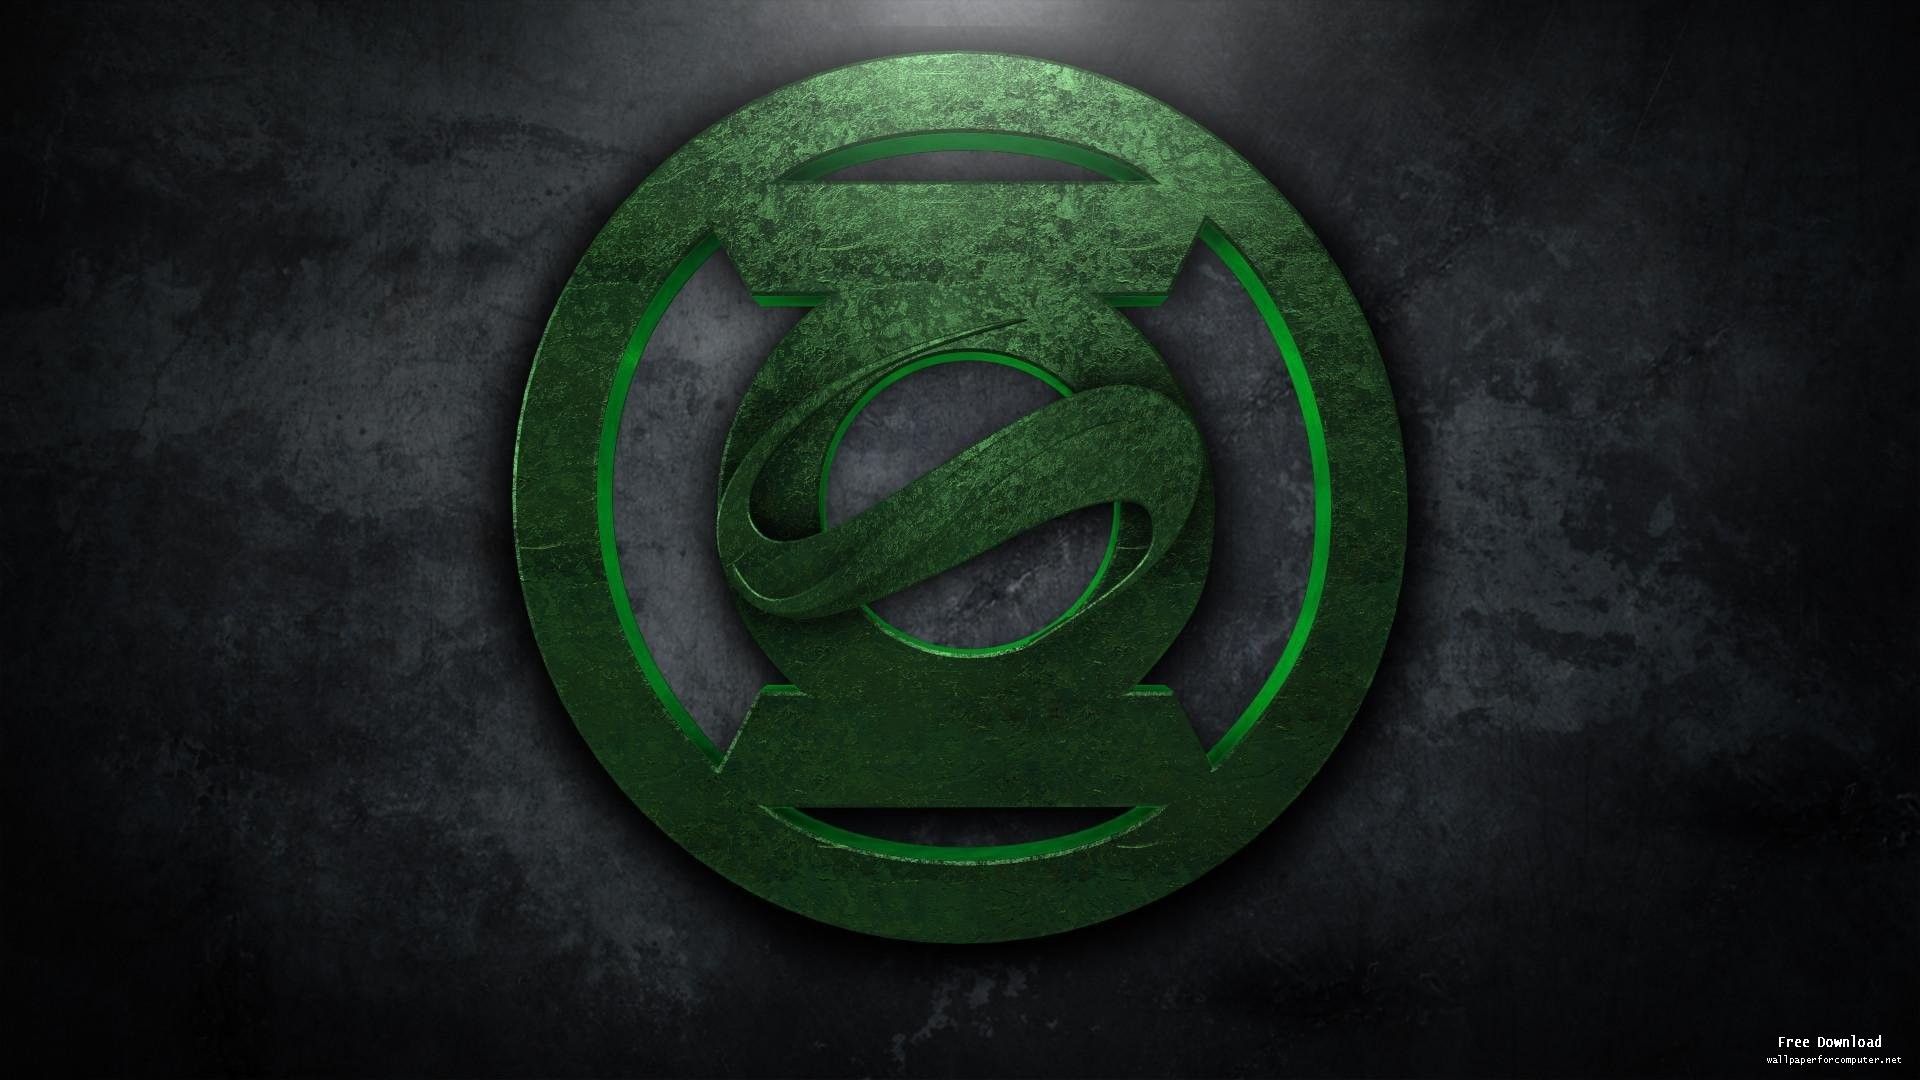 1920x1080 Green Lantern logo Wallpapers for Computer 218 HD Wallpapers Site 